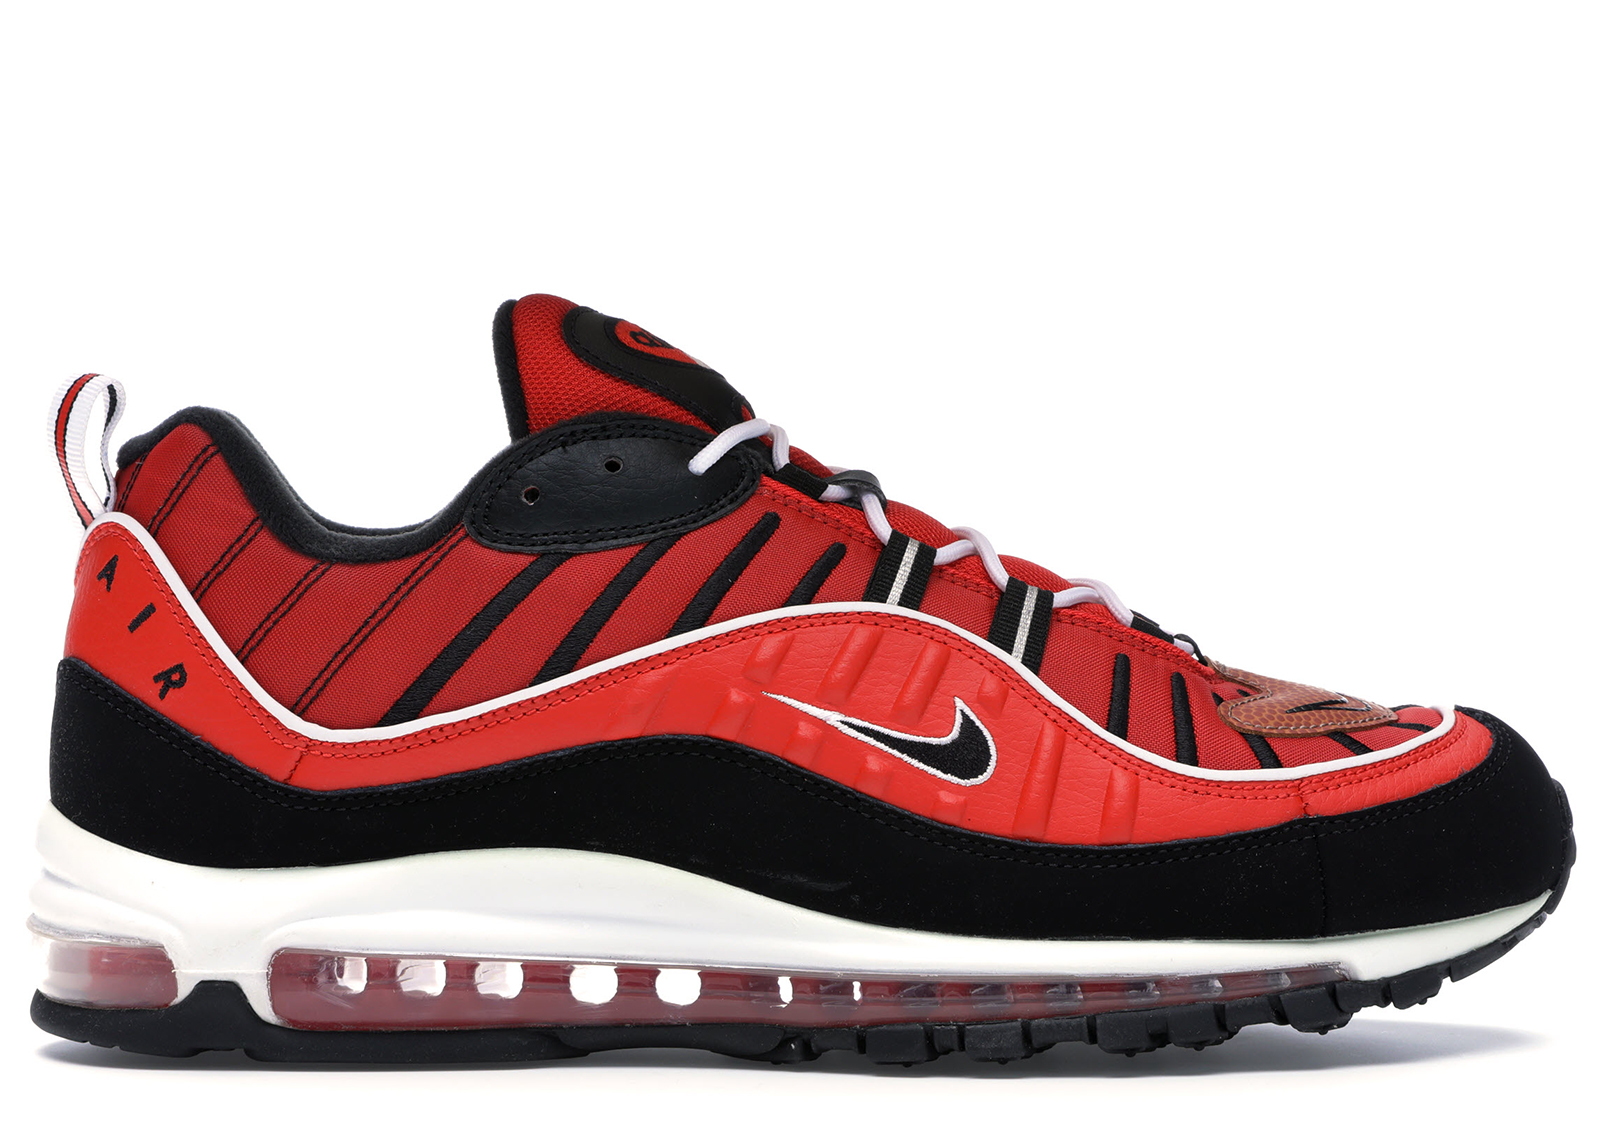 red and blue air max 98